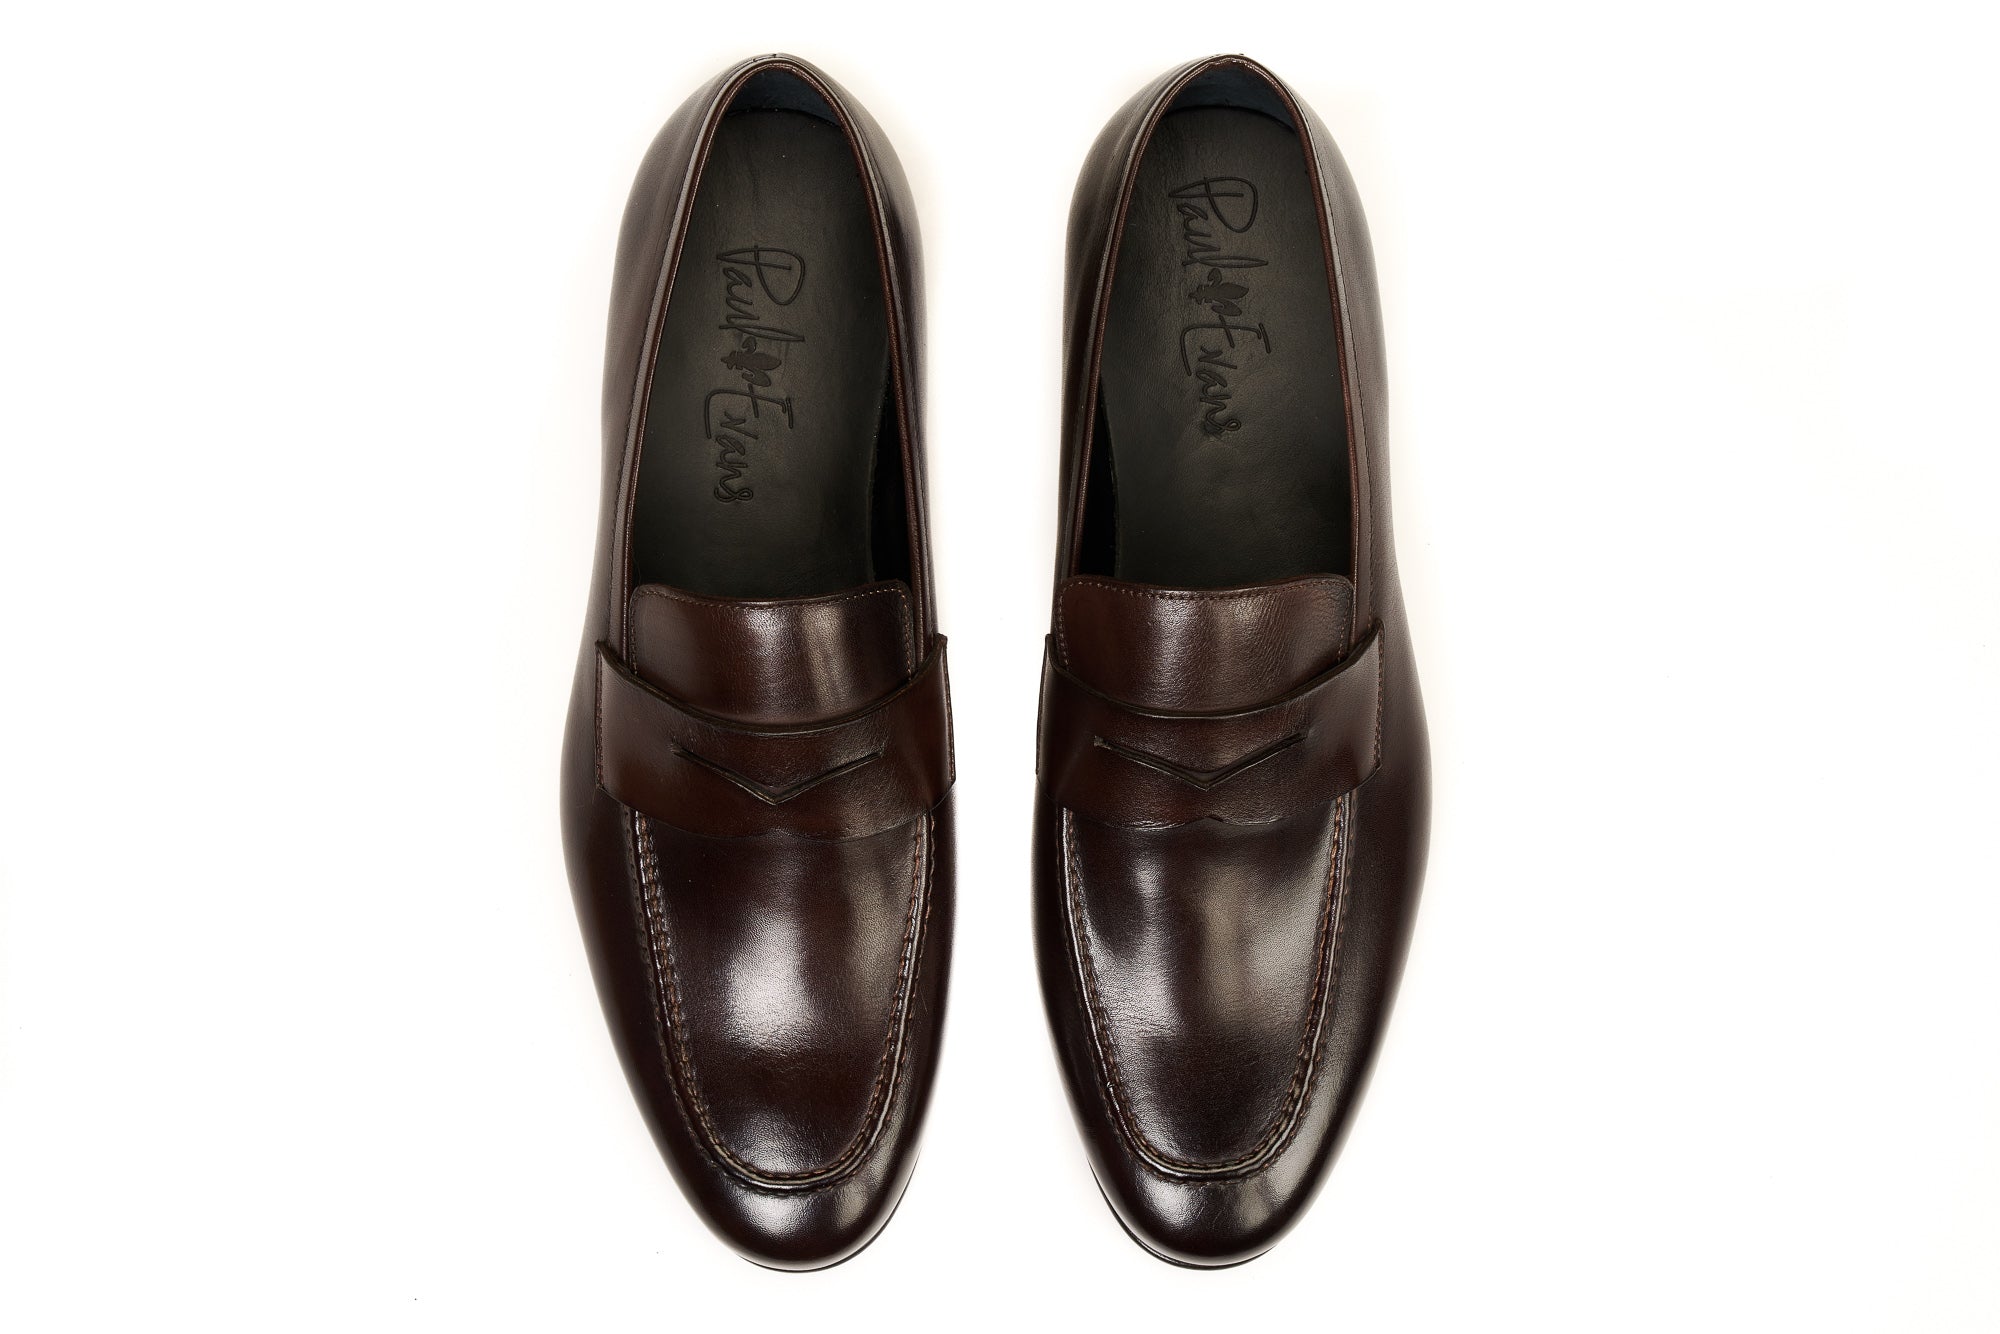 The Edward Penny Loafer - Dark Brown Chocolate